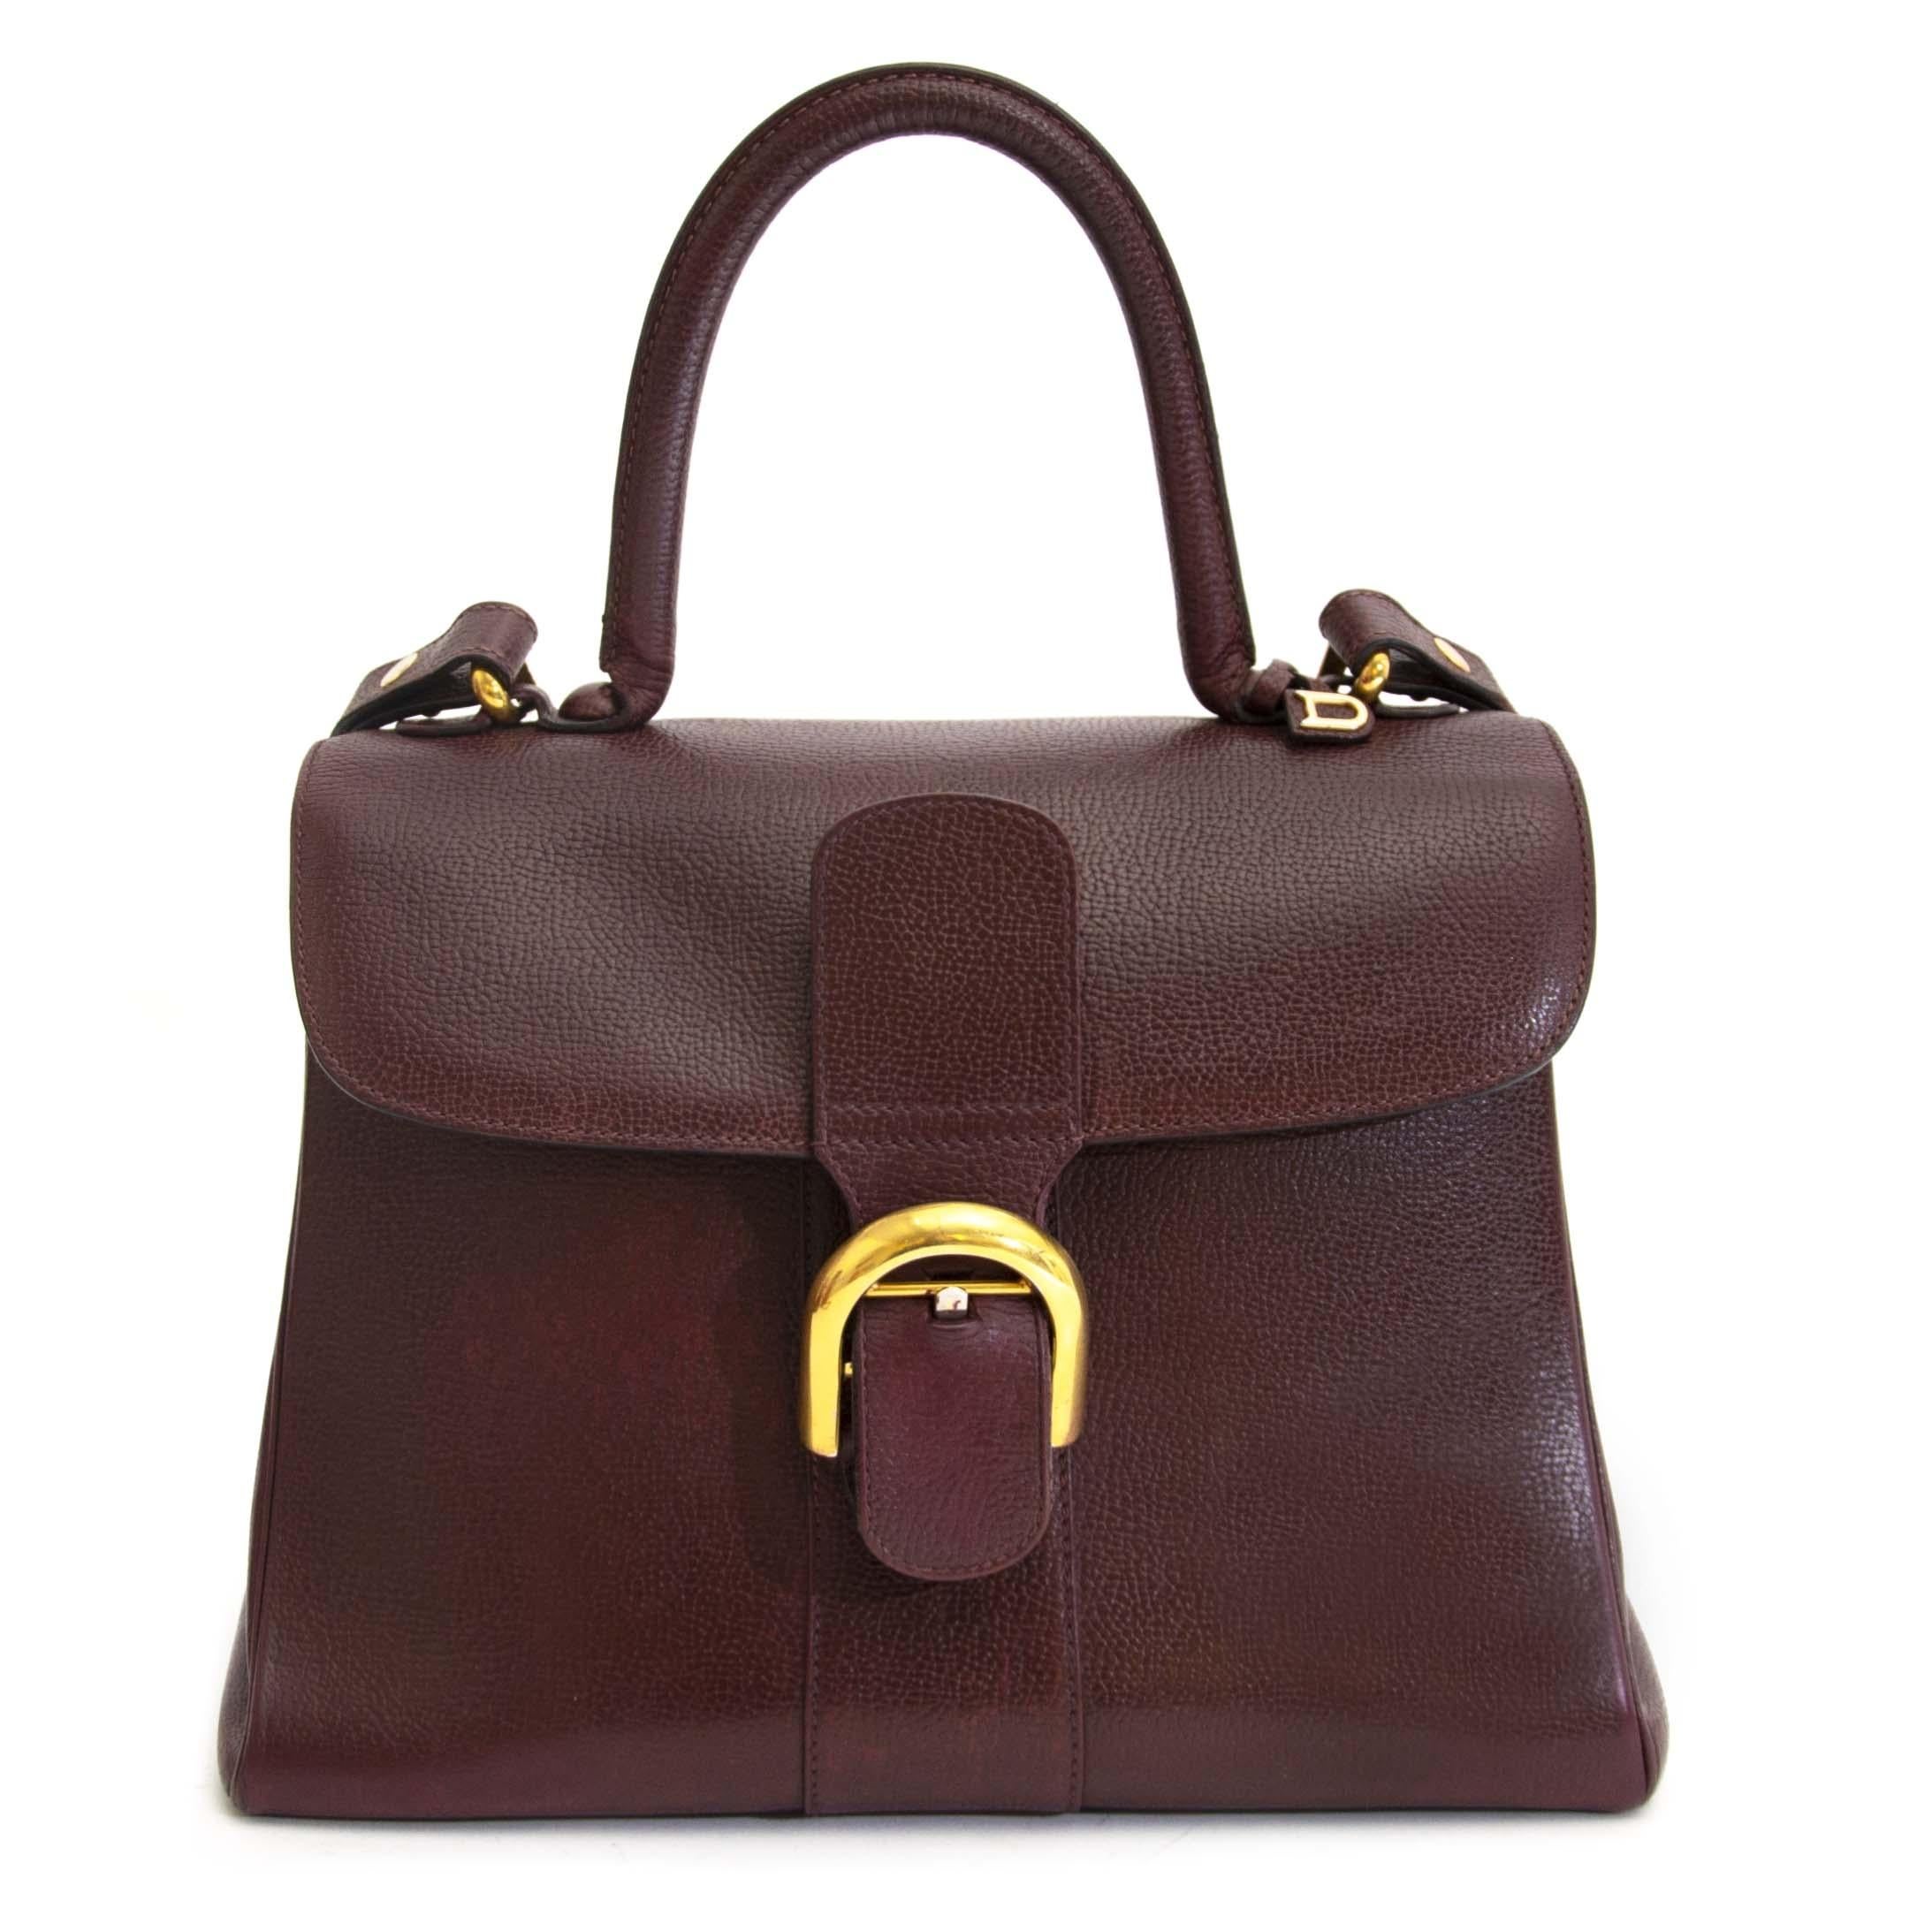 Good condition

Delvaux Brillant Bordeaux MM GHW + Strap

Delvaux Brillant Bordeaux MM with gold hardware in blood red grained calsfkin leather.
This classic satchel from premium Belgium luxury leather goods House Delvaux excels in both style and